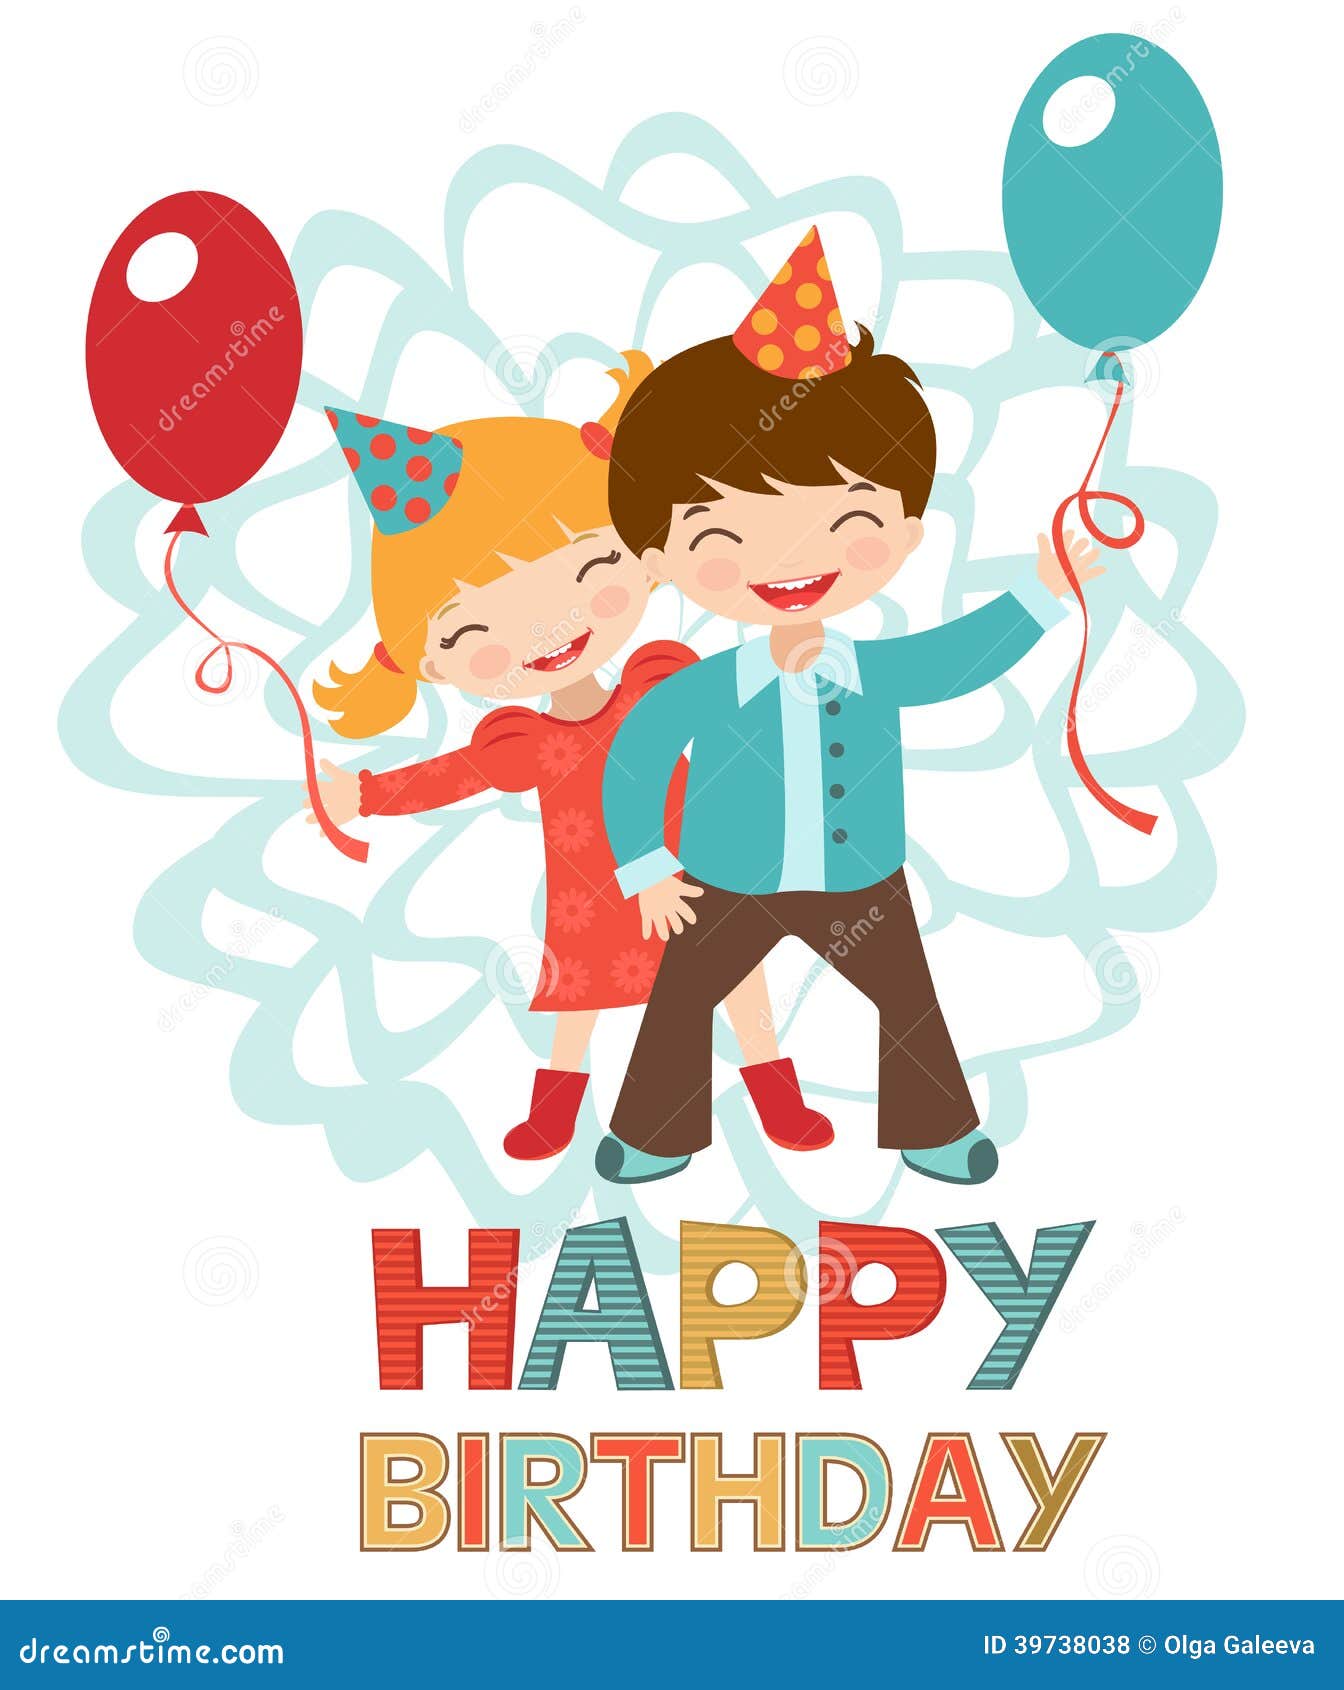 Birthday Card with Happy Kids Stock Vector - Illustration of happiness ...